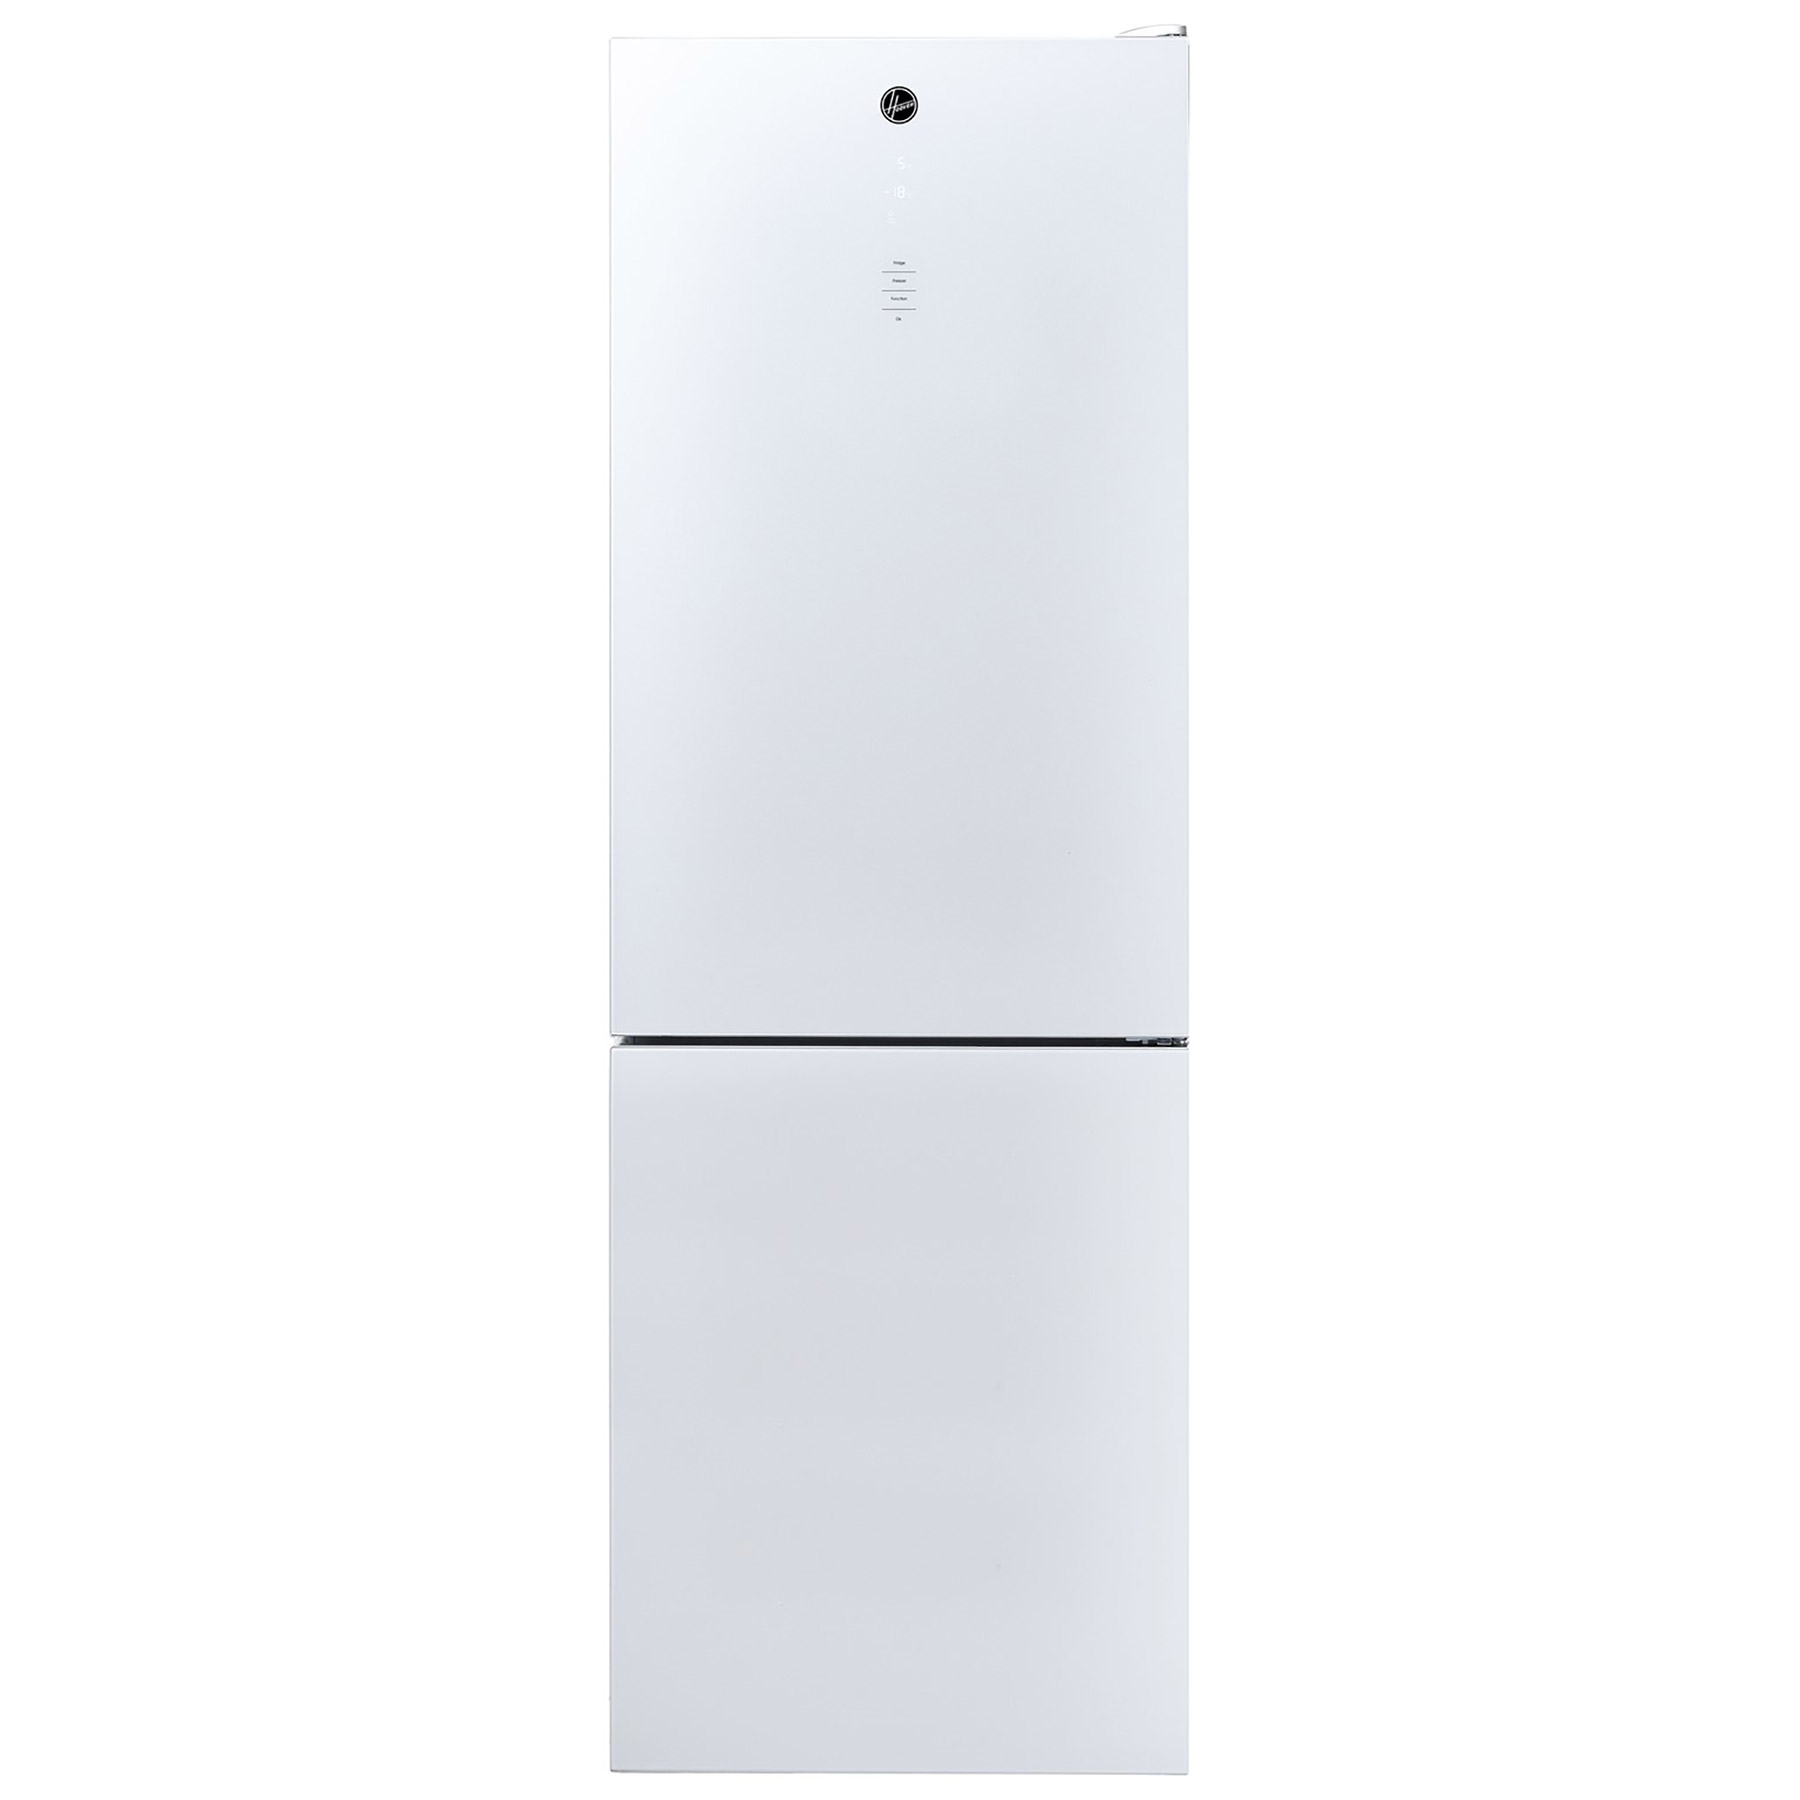 Image of Hoover HFDG6182WN 60cm No Frost Fridge Freezer in White 1 86m F Rated